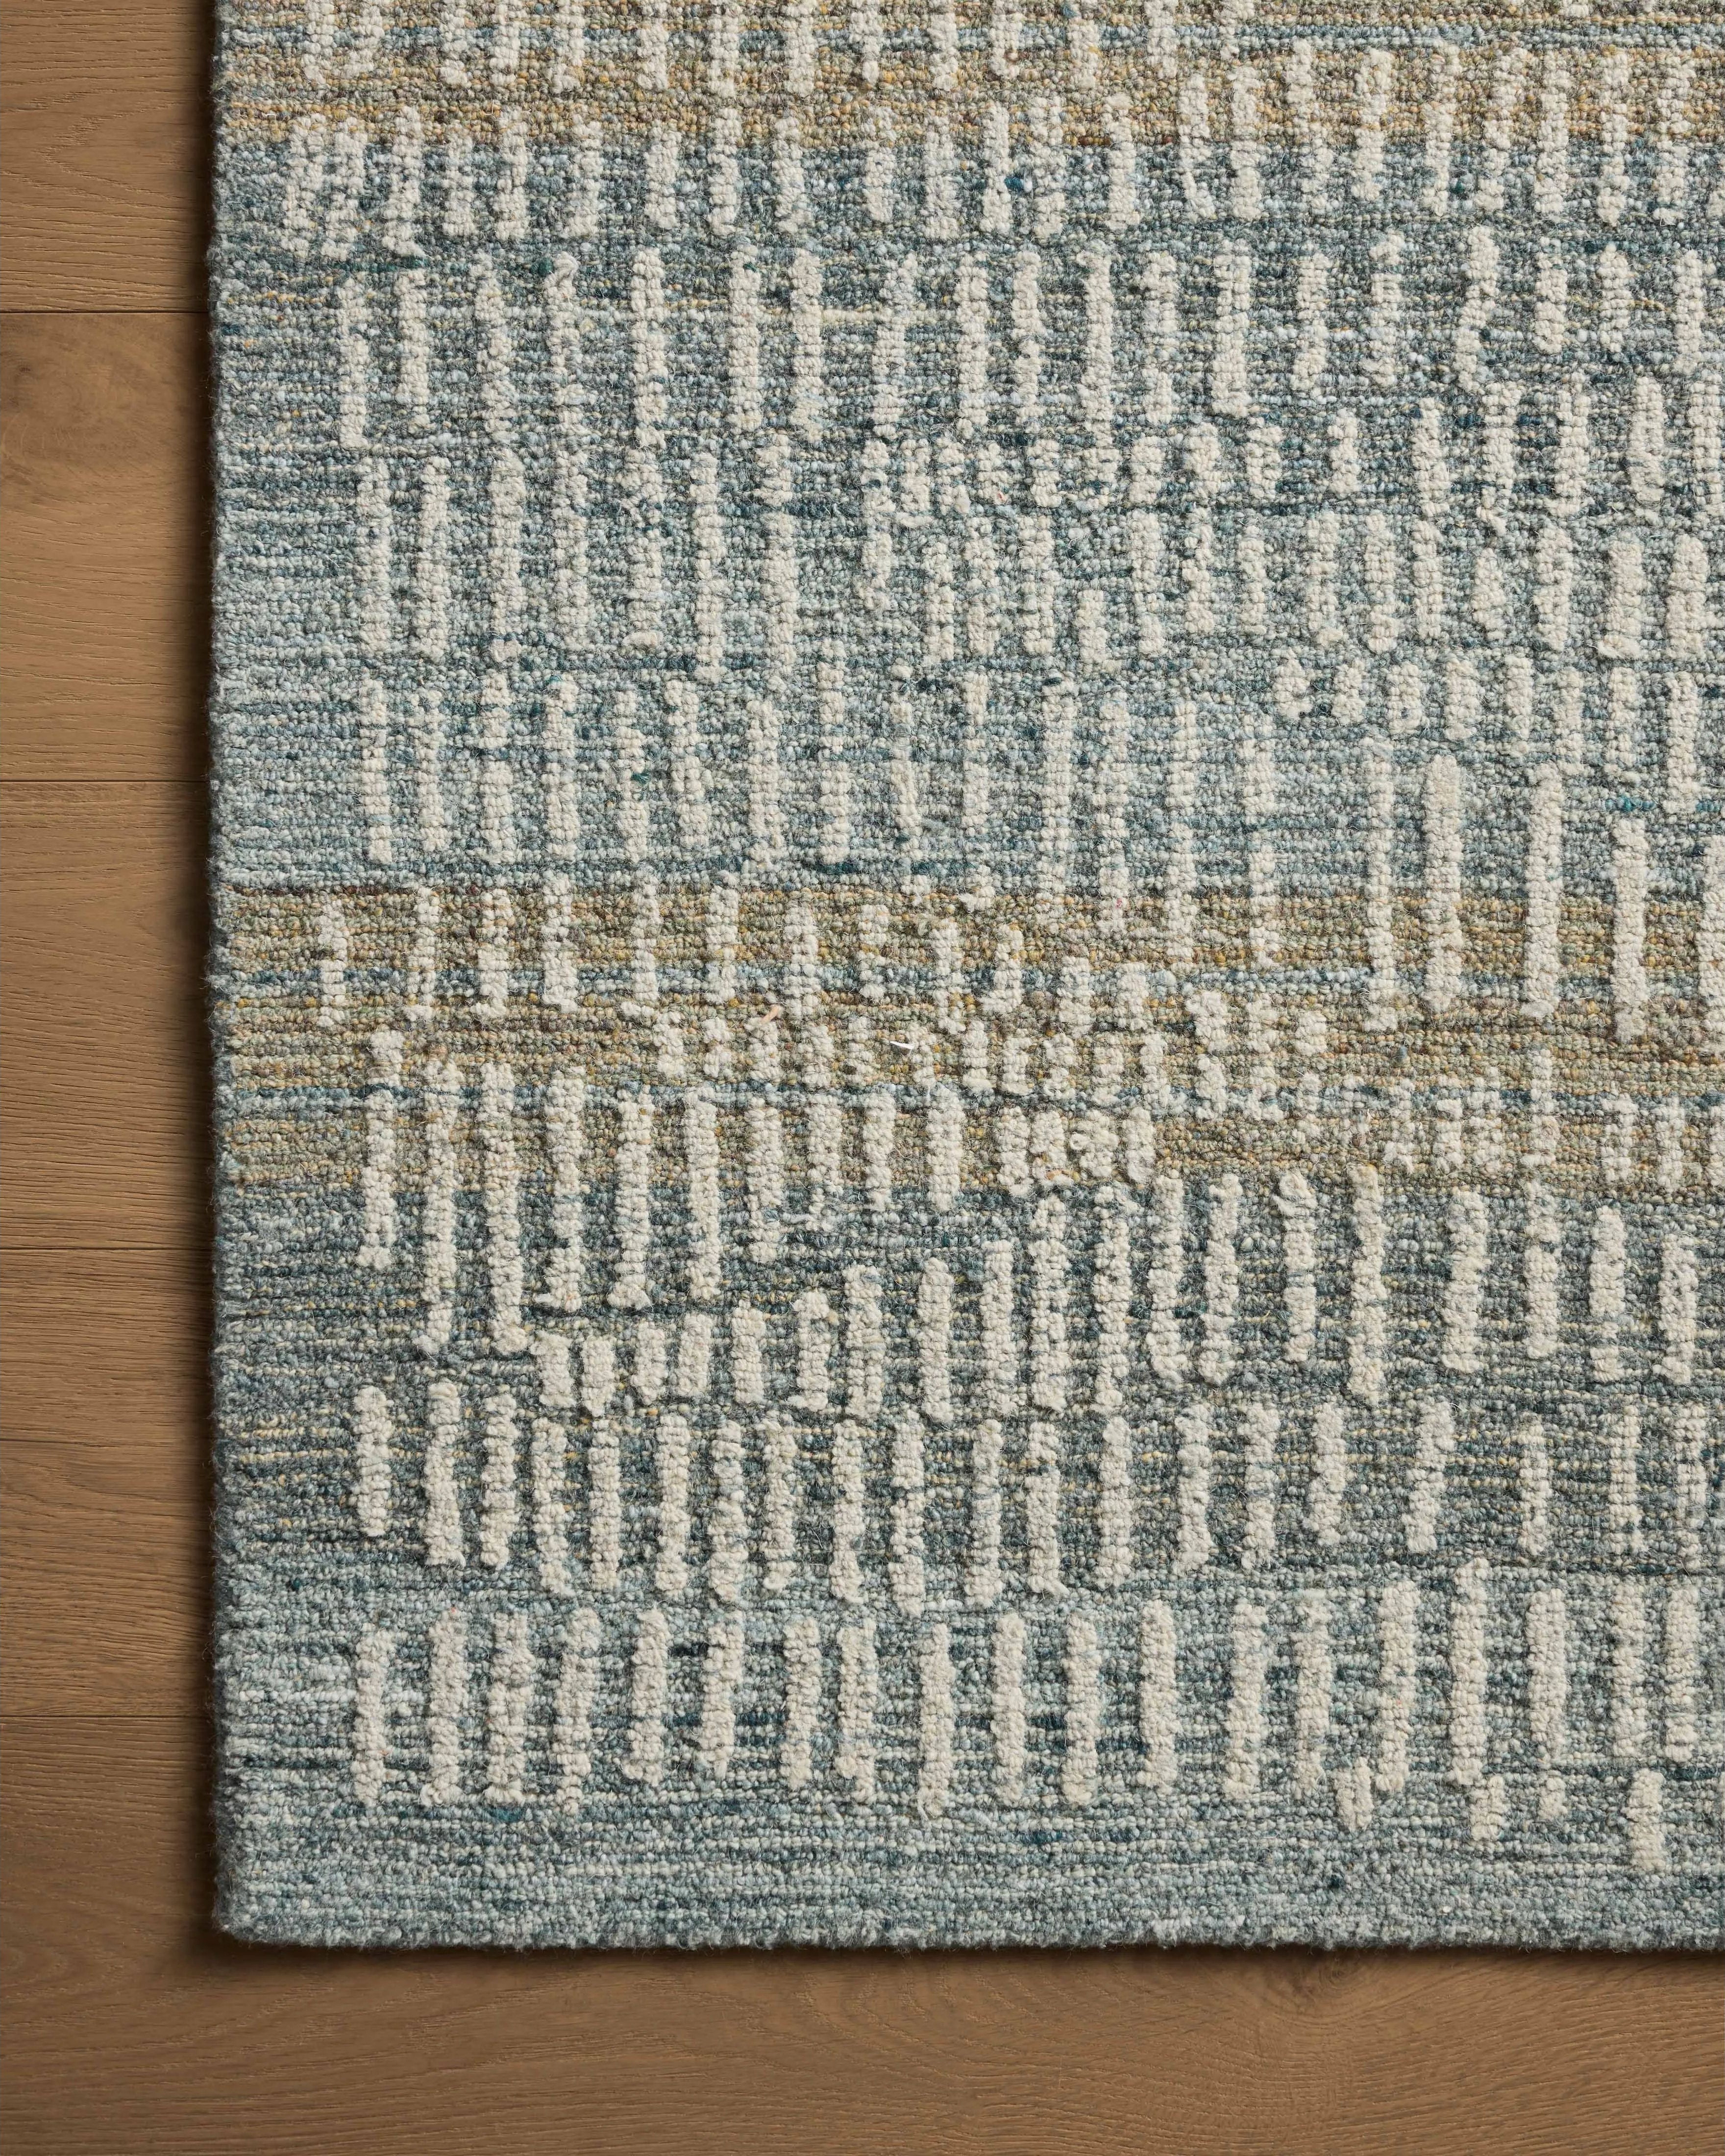 The Elias Ocean / Oatmeal Rug is a hand-tufted wool area rug with lively graphic patterns in earth and stone tones. There’s a unique texture to the rug made by over-tufting, in which a design is hand-tufted over a tufted base, creating a subtle high-low pile. Amethyst Home provides interior design, new home construction design consulting, vintage area rugs, and lighting in the Calabasas metro area.